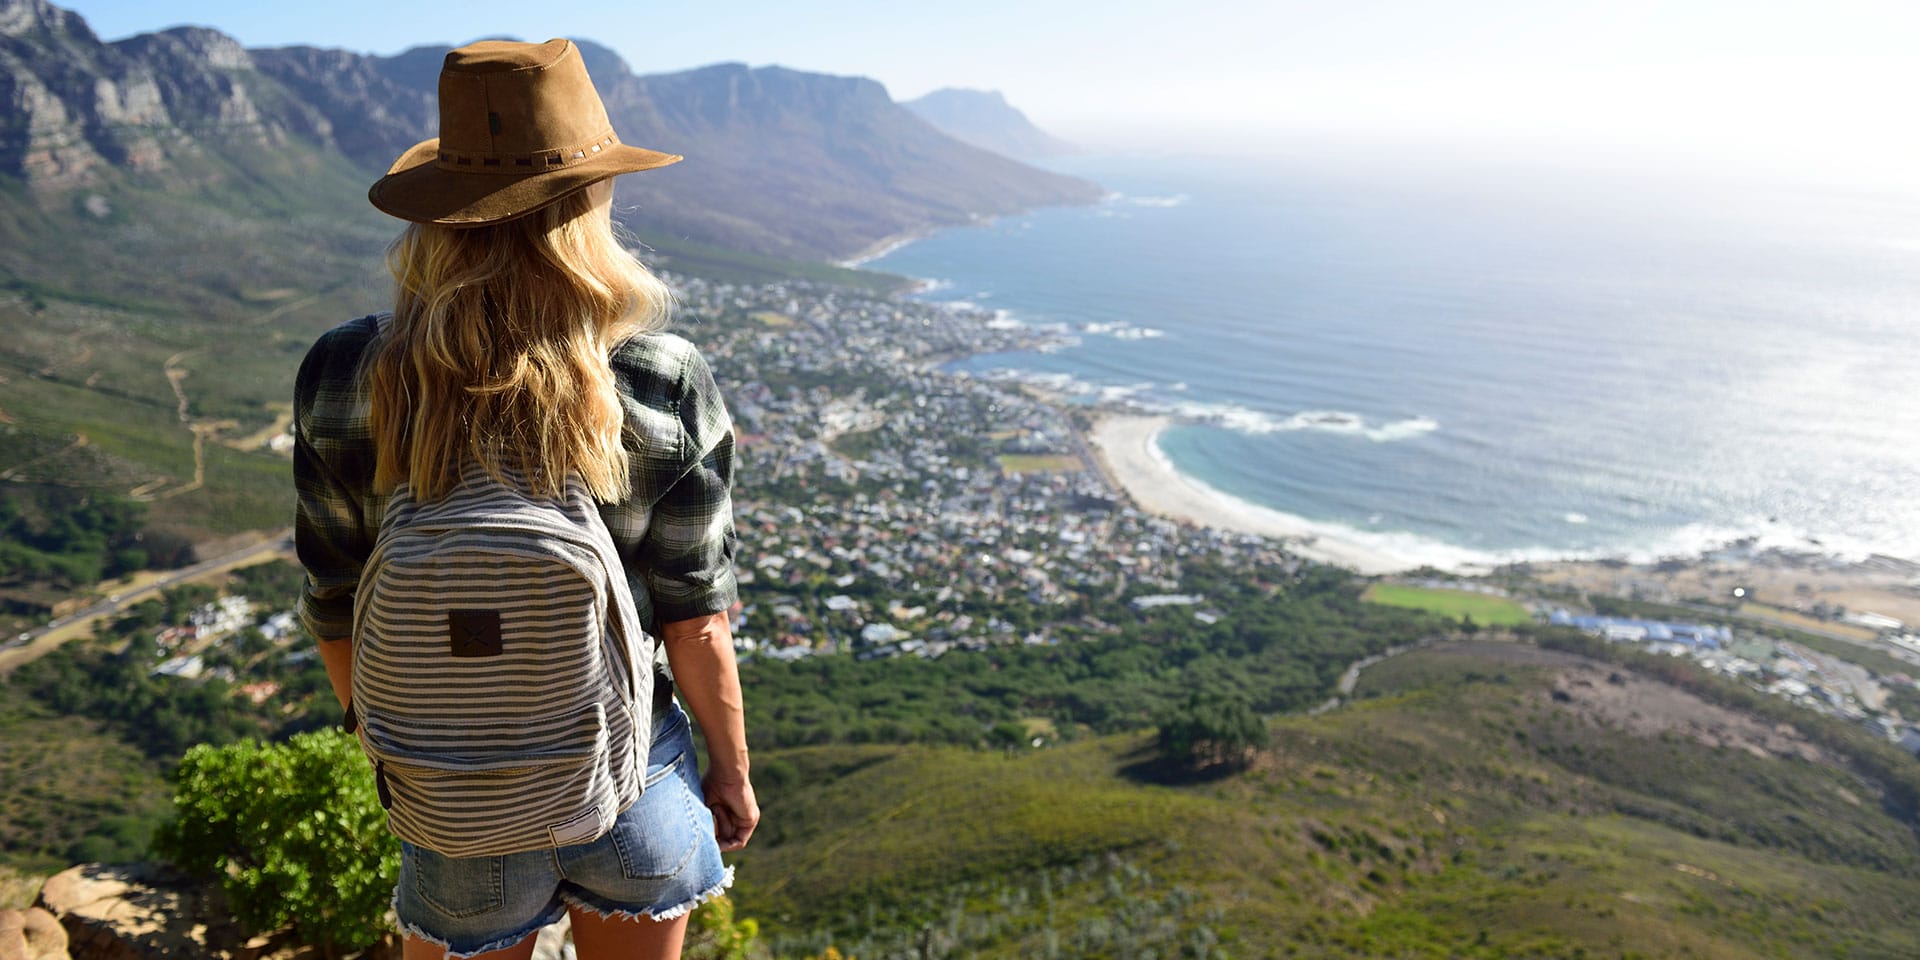 Run, Hike or Bike? Where to Cross the Finish Line in Cape Town